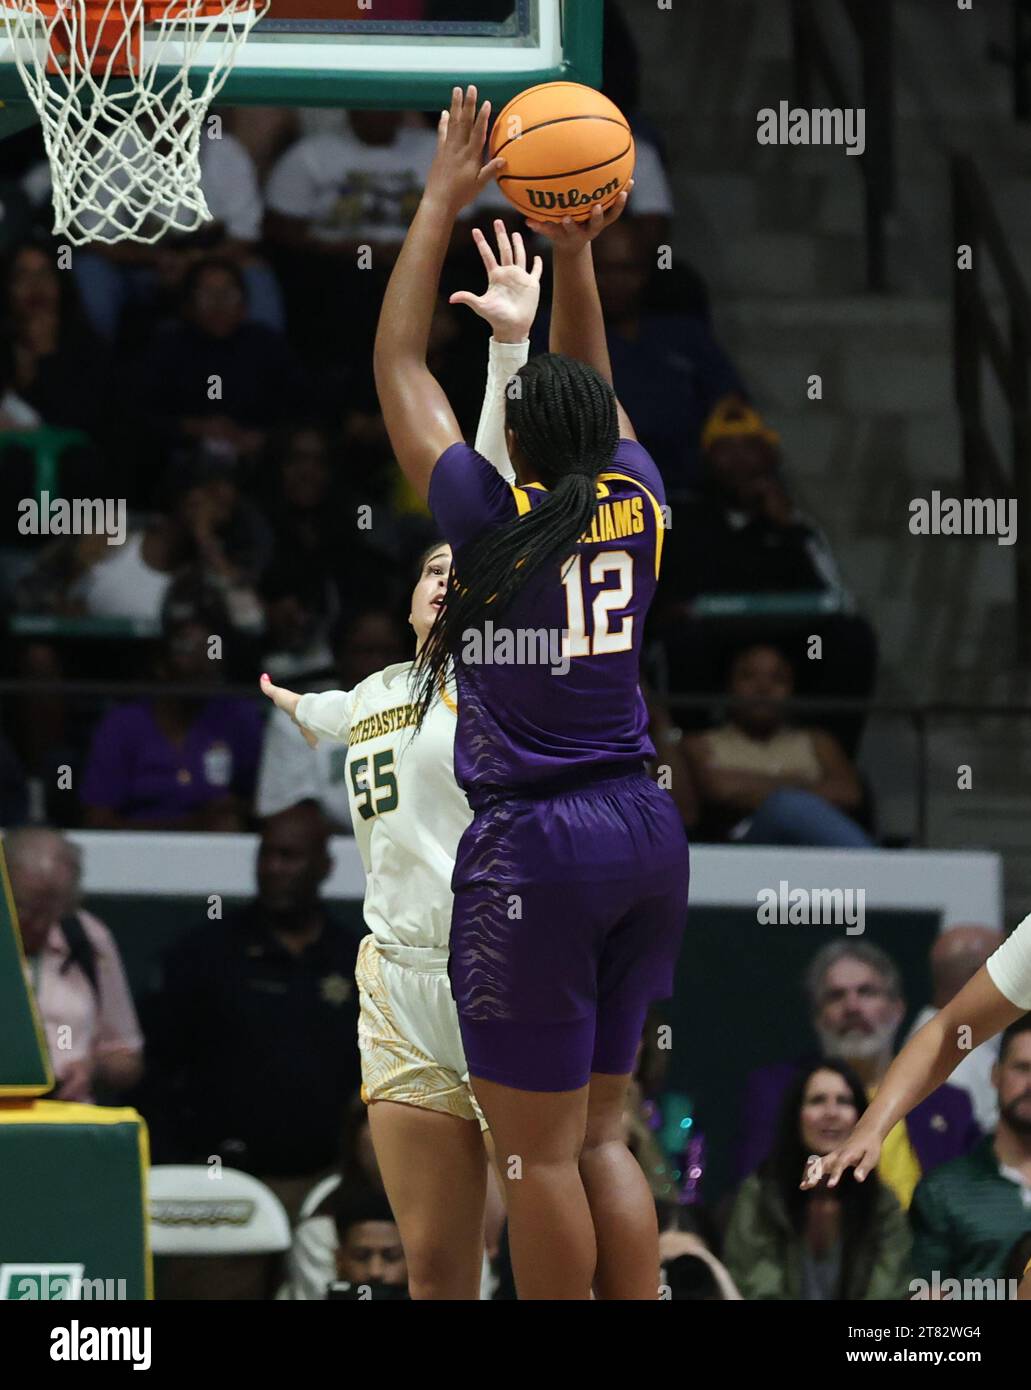 Hammond, USA. 17th Nov, 2023. LSU Lady Tigers guard Mikaylah Williams (12) shoots a jumper over SE Louisiana Lady Lions guard Hailey Giaratano (55) during a women's college basketball game at the University Center in Hammond, Louisiana on Friday, November 17, 2023. (Photo by Peter G. Forest/Sipa USA) Credit: Sipa USA/Alamy Live News Stock Photo